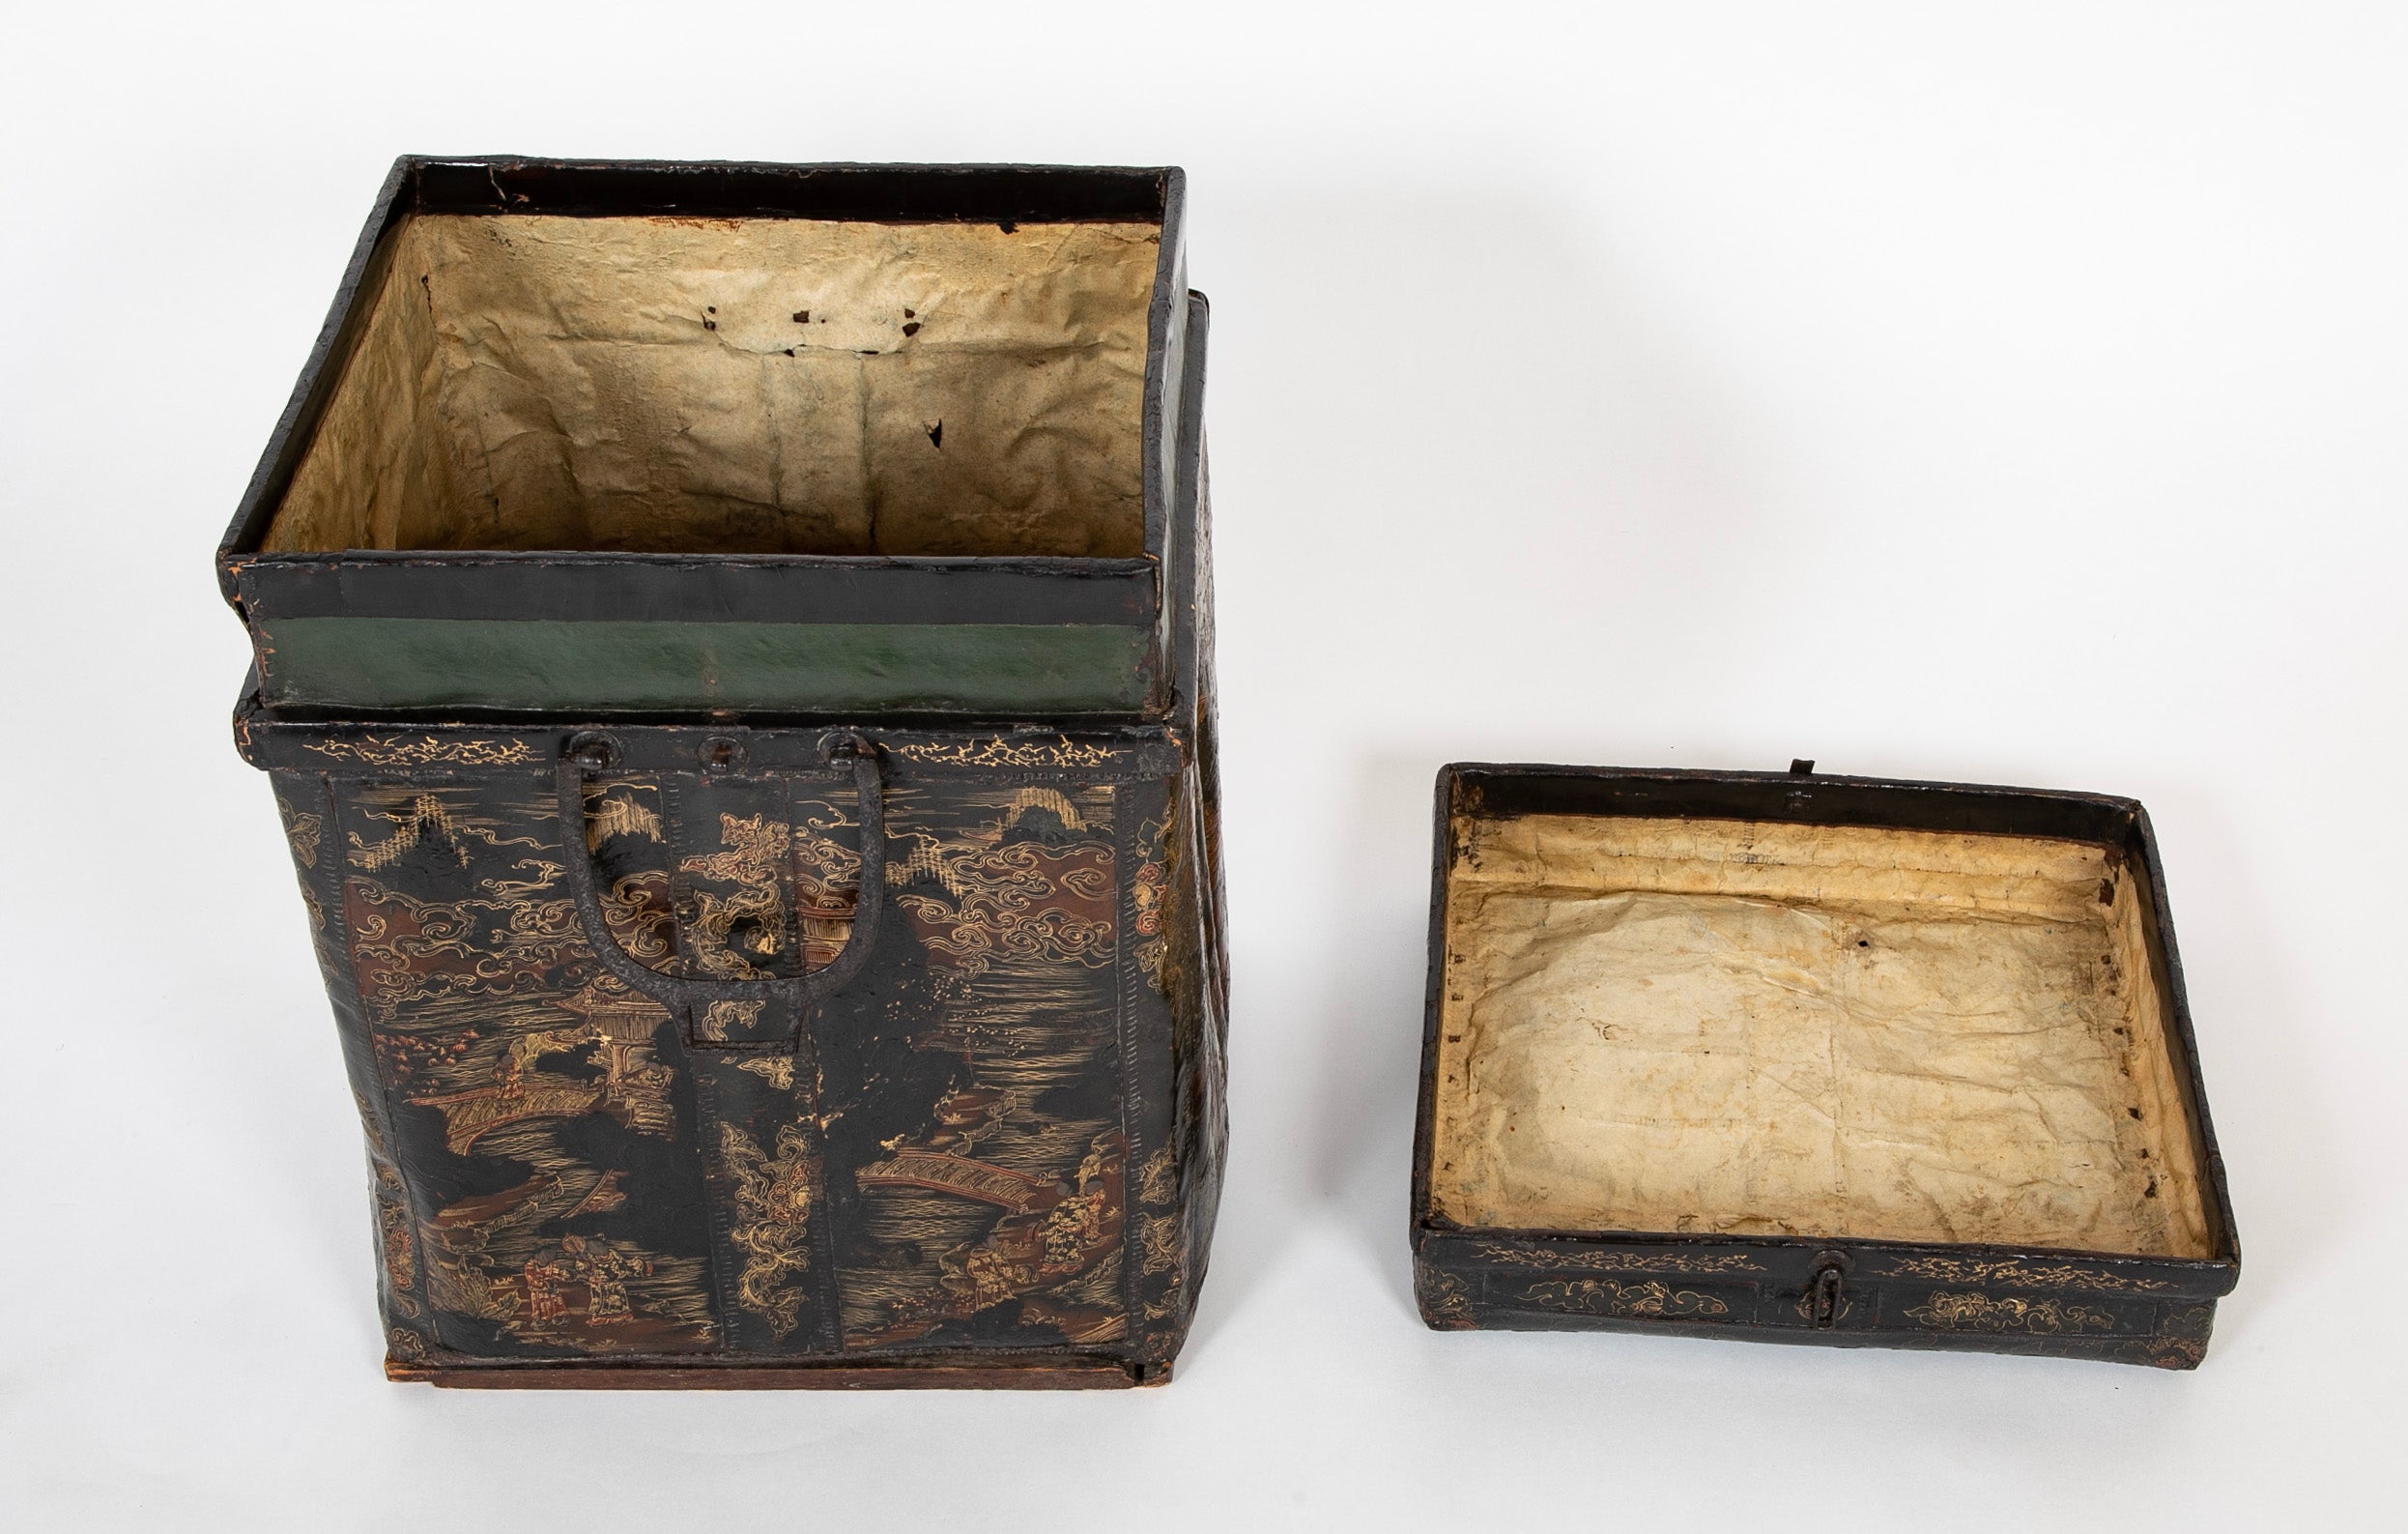 19th Century Chinese Travel Chest of Gilt Lacquer